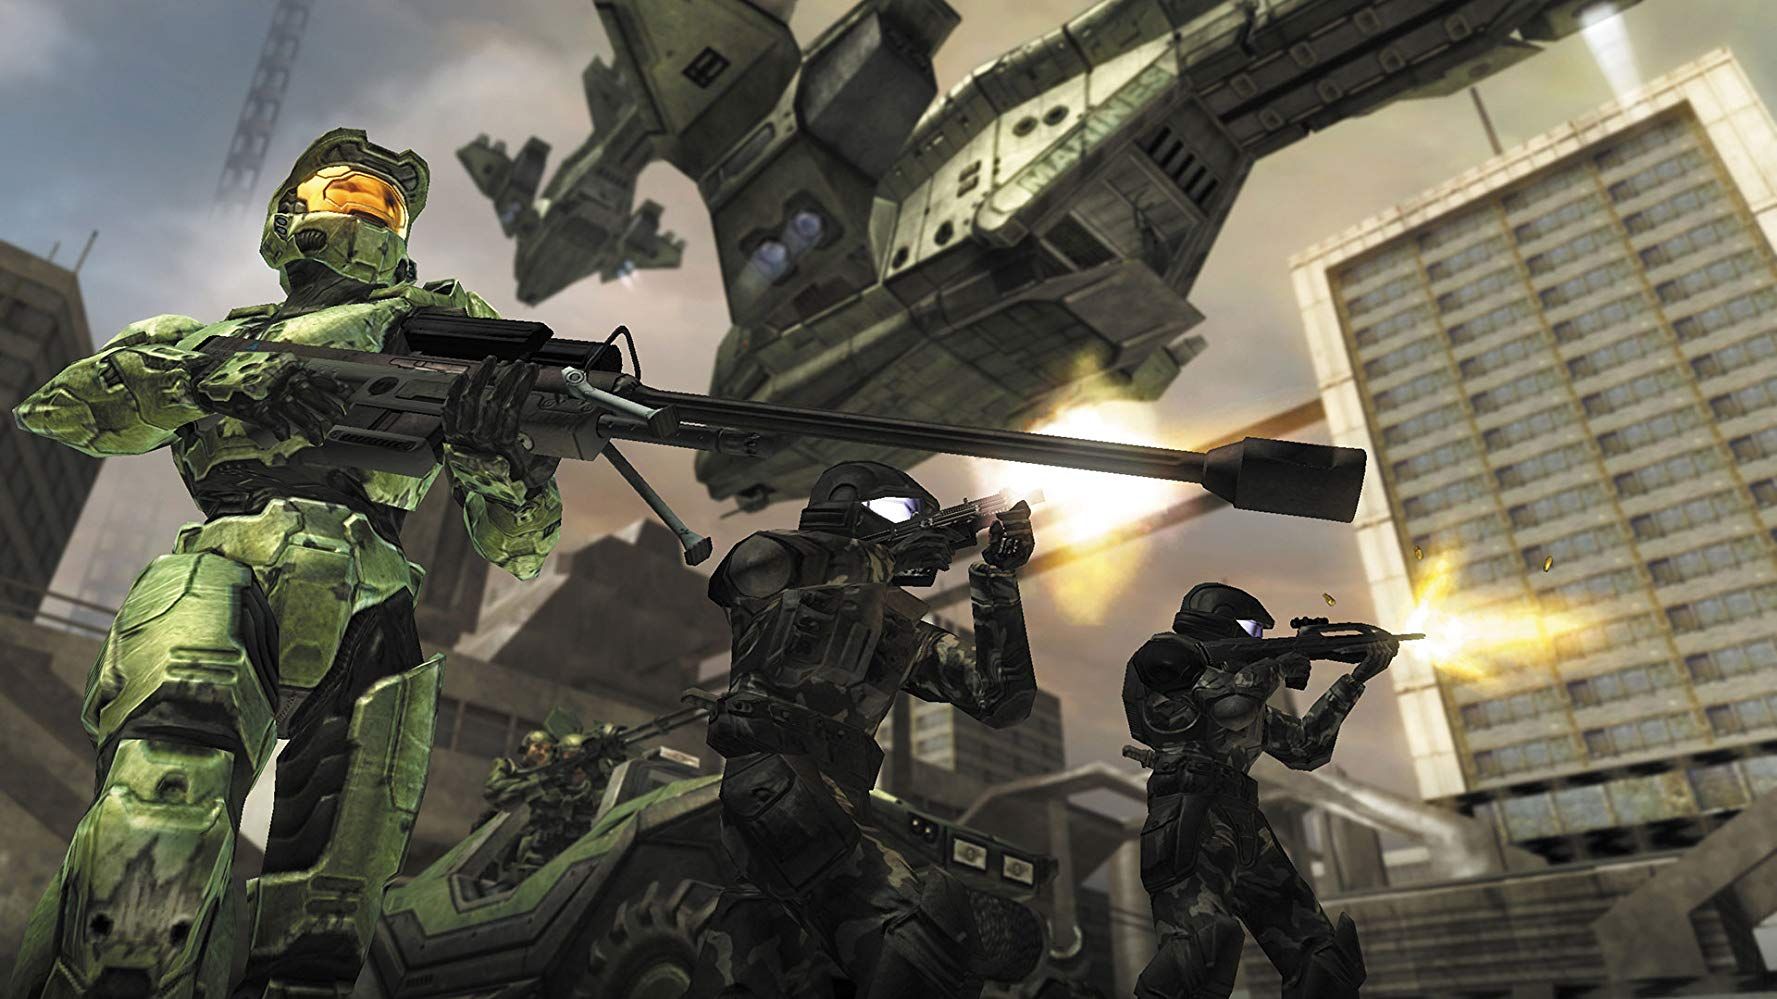 Master Chief with sniper rifle in Halo